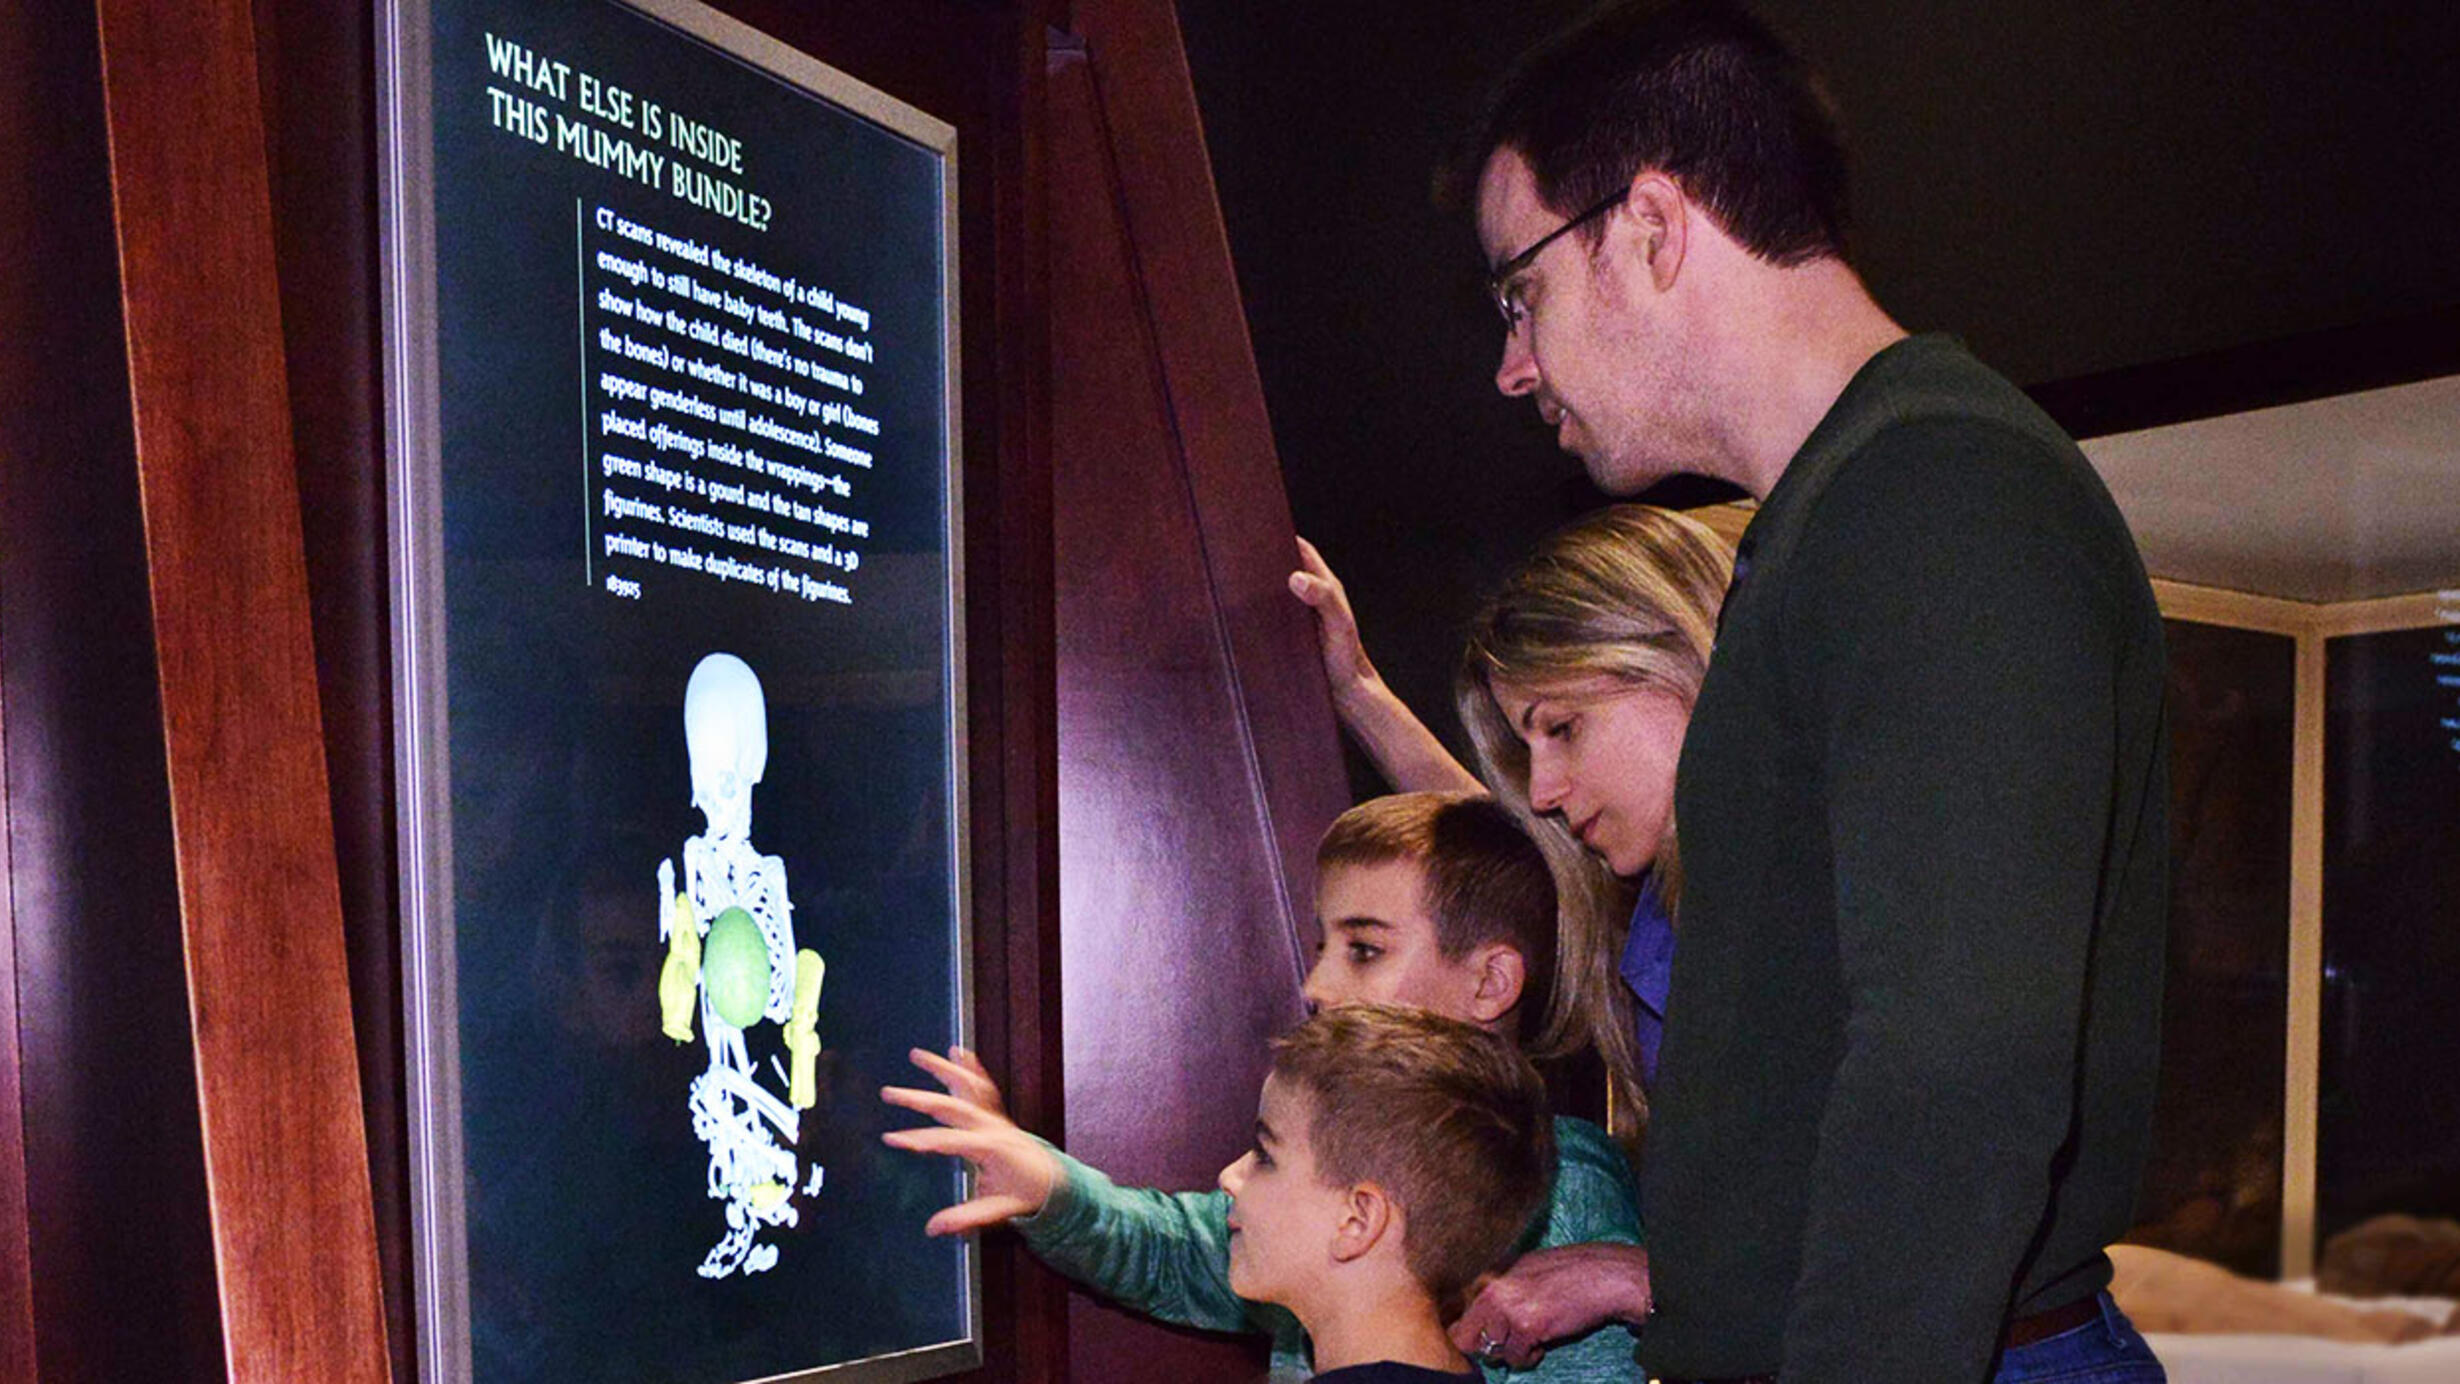 Two children and two adults gather around a digital touch screen placed on the wall that shows views from a CT scan of a peruvian mummy.